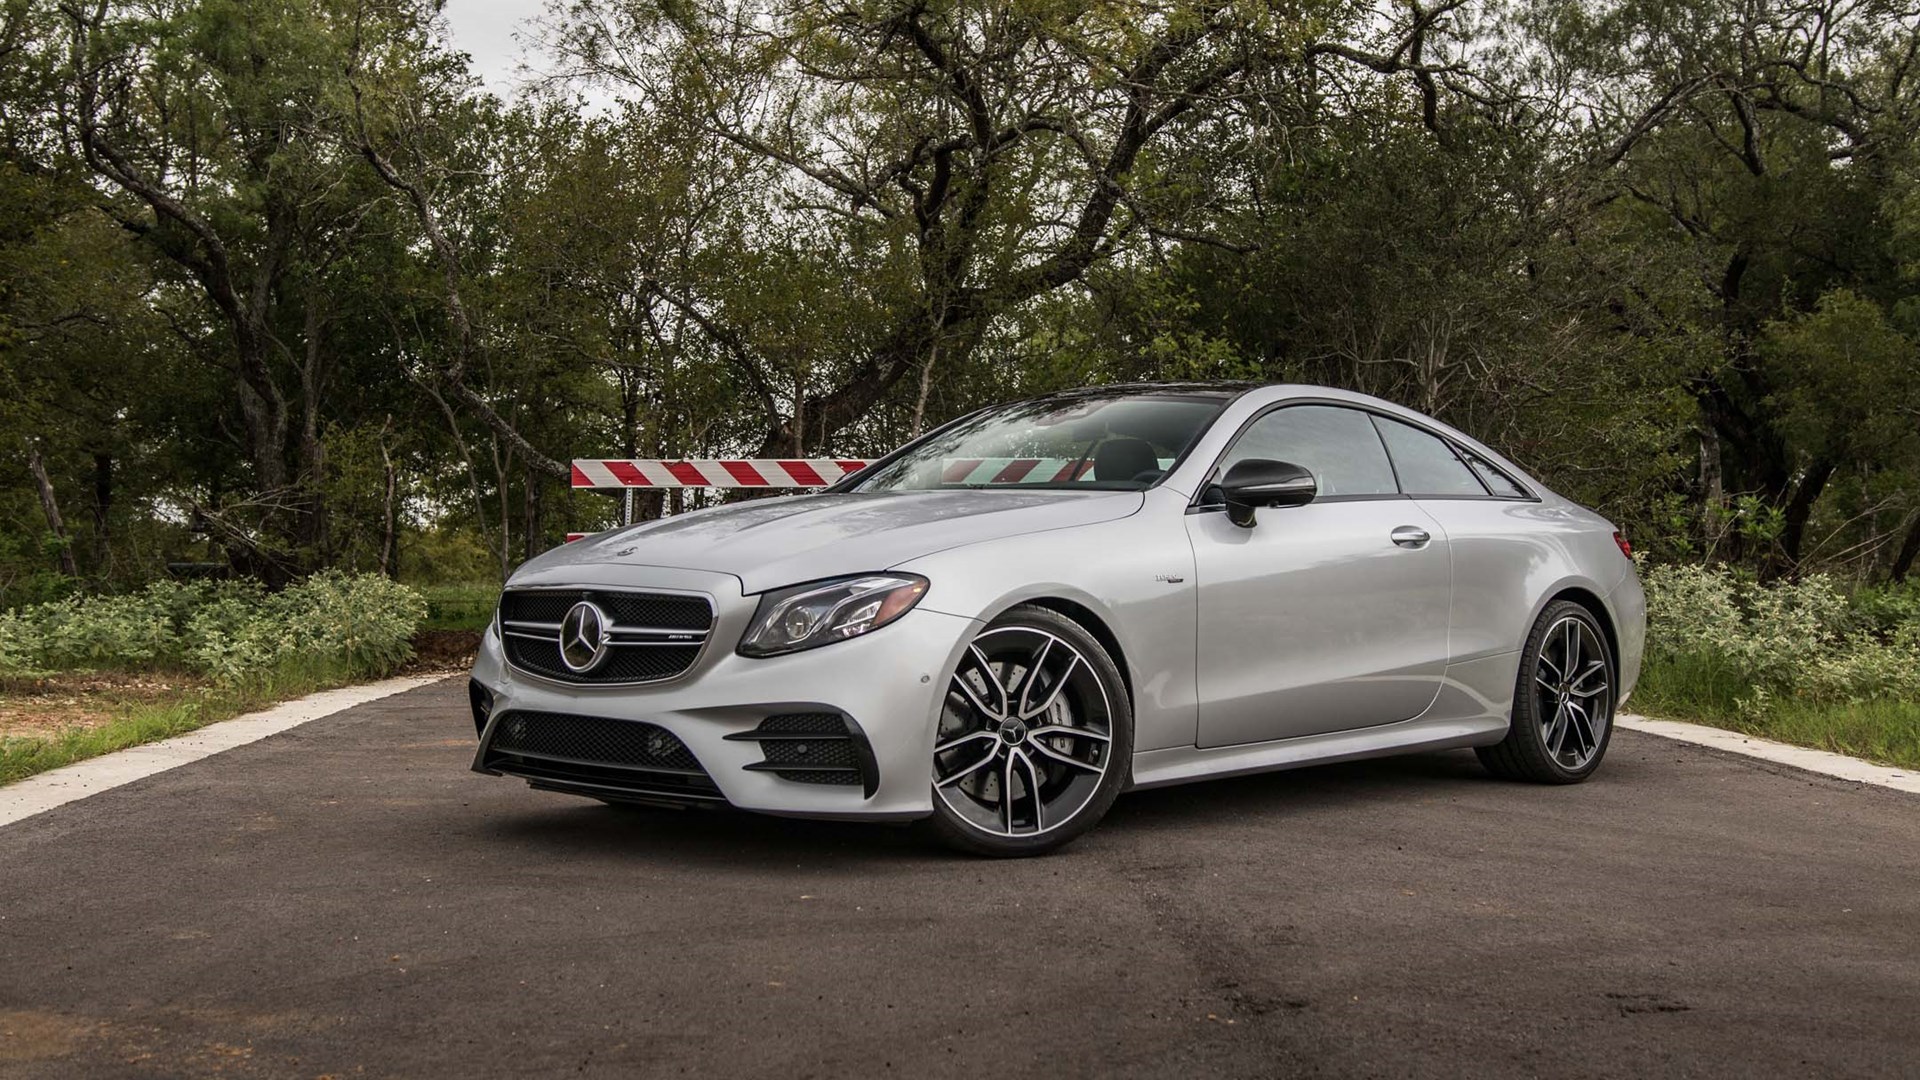 2019 Mercedes-AMG E53 Coupe and Cabriolet First Drive Review | AutoTrader.ca